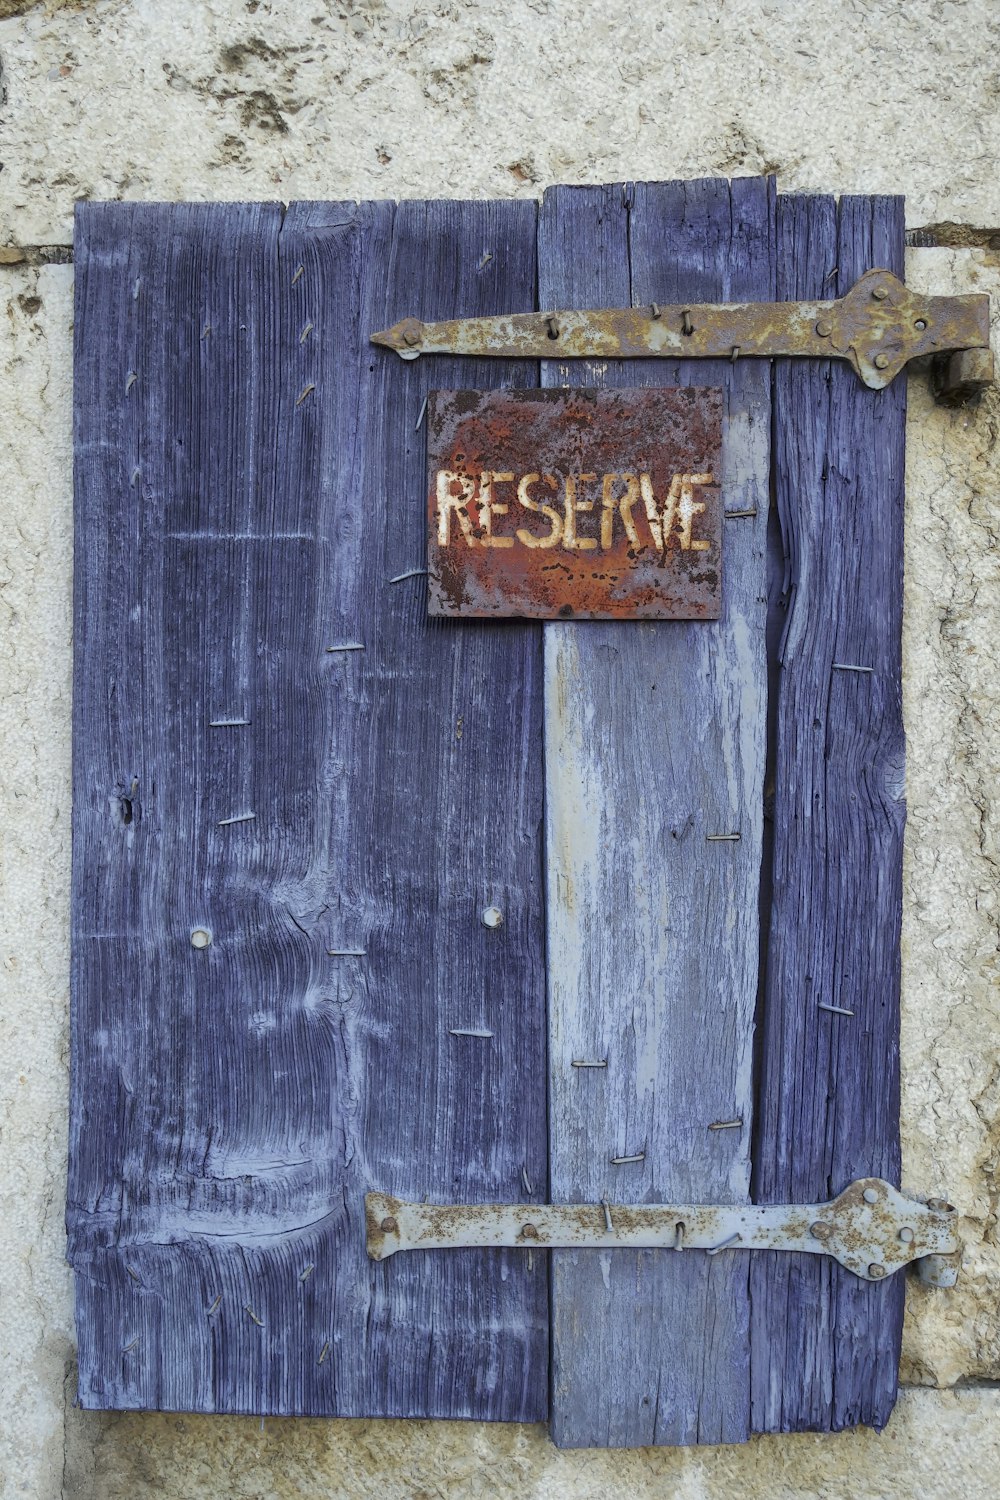 a wooden door with a sign on it